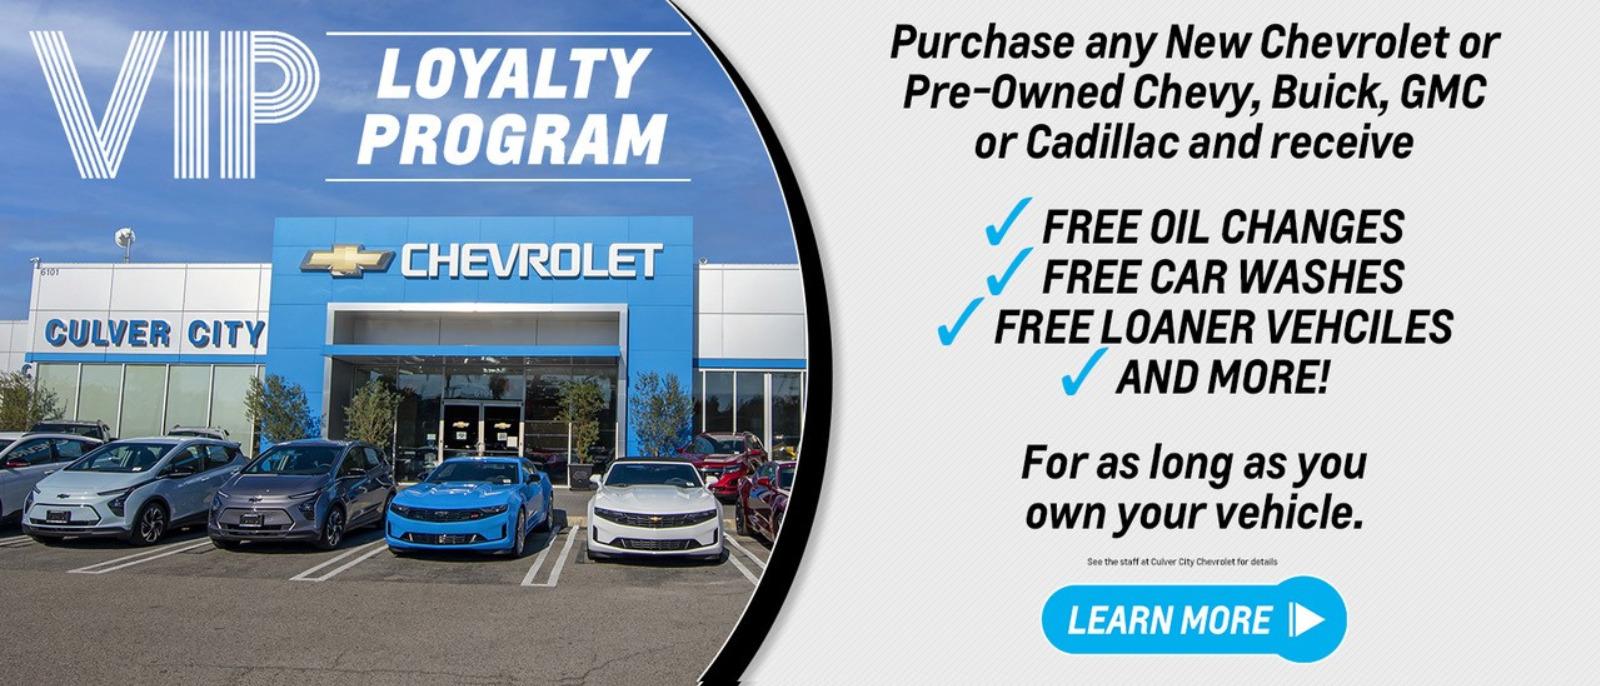 Purchase any new or used Chevy or Certified Pre-Owned GM vehicles and receive 
FREE OIL CHANGES 
FREE CAR WASHES 
FREE LOANER VEHCILES 
AND MORE! 
For as long as you own your vehicle.